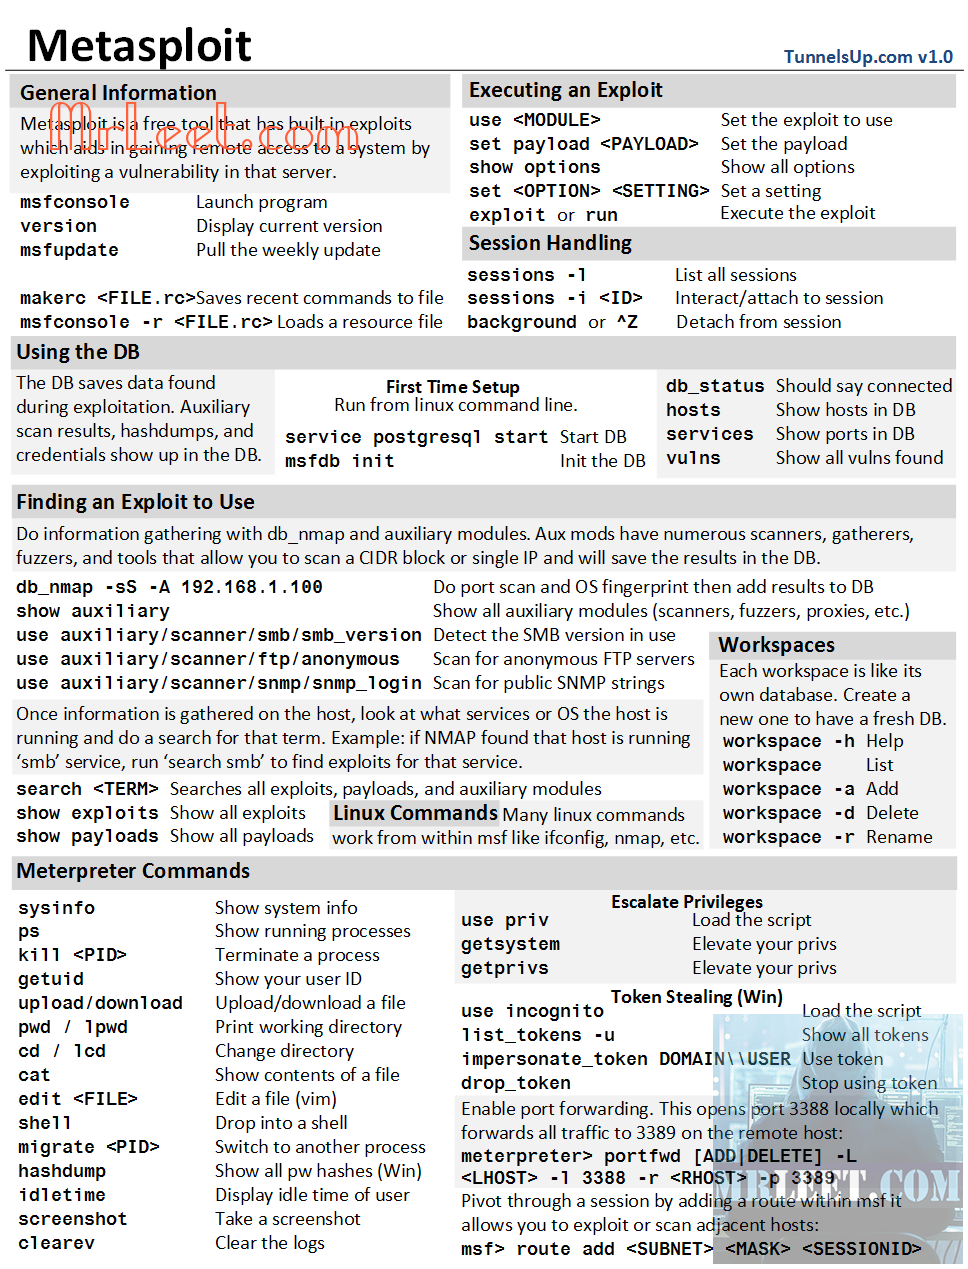 Metasploit Cheat Sheet A handy printable reference guide